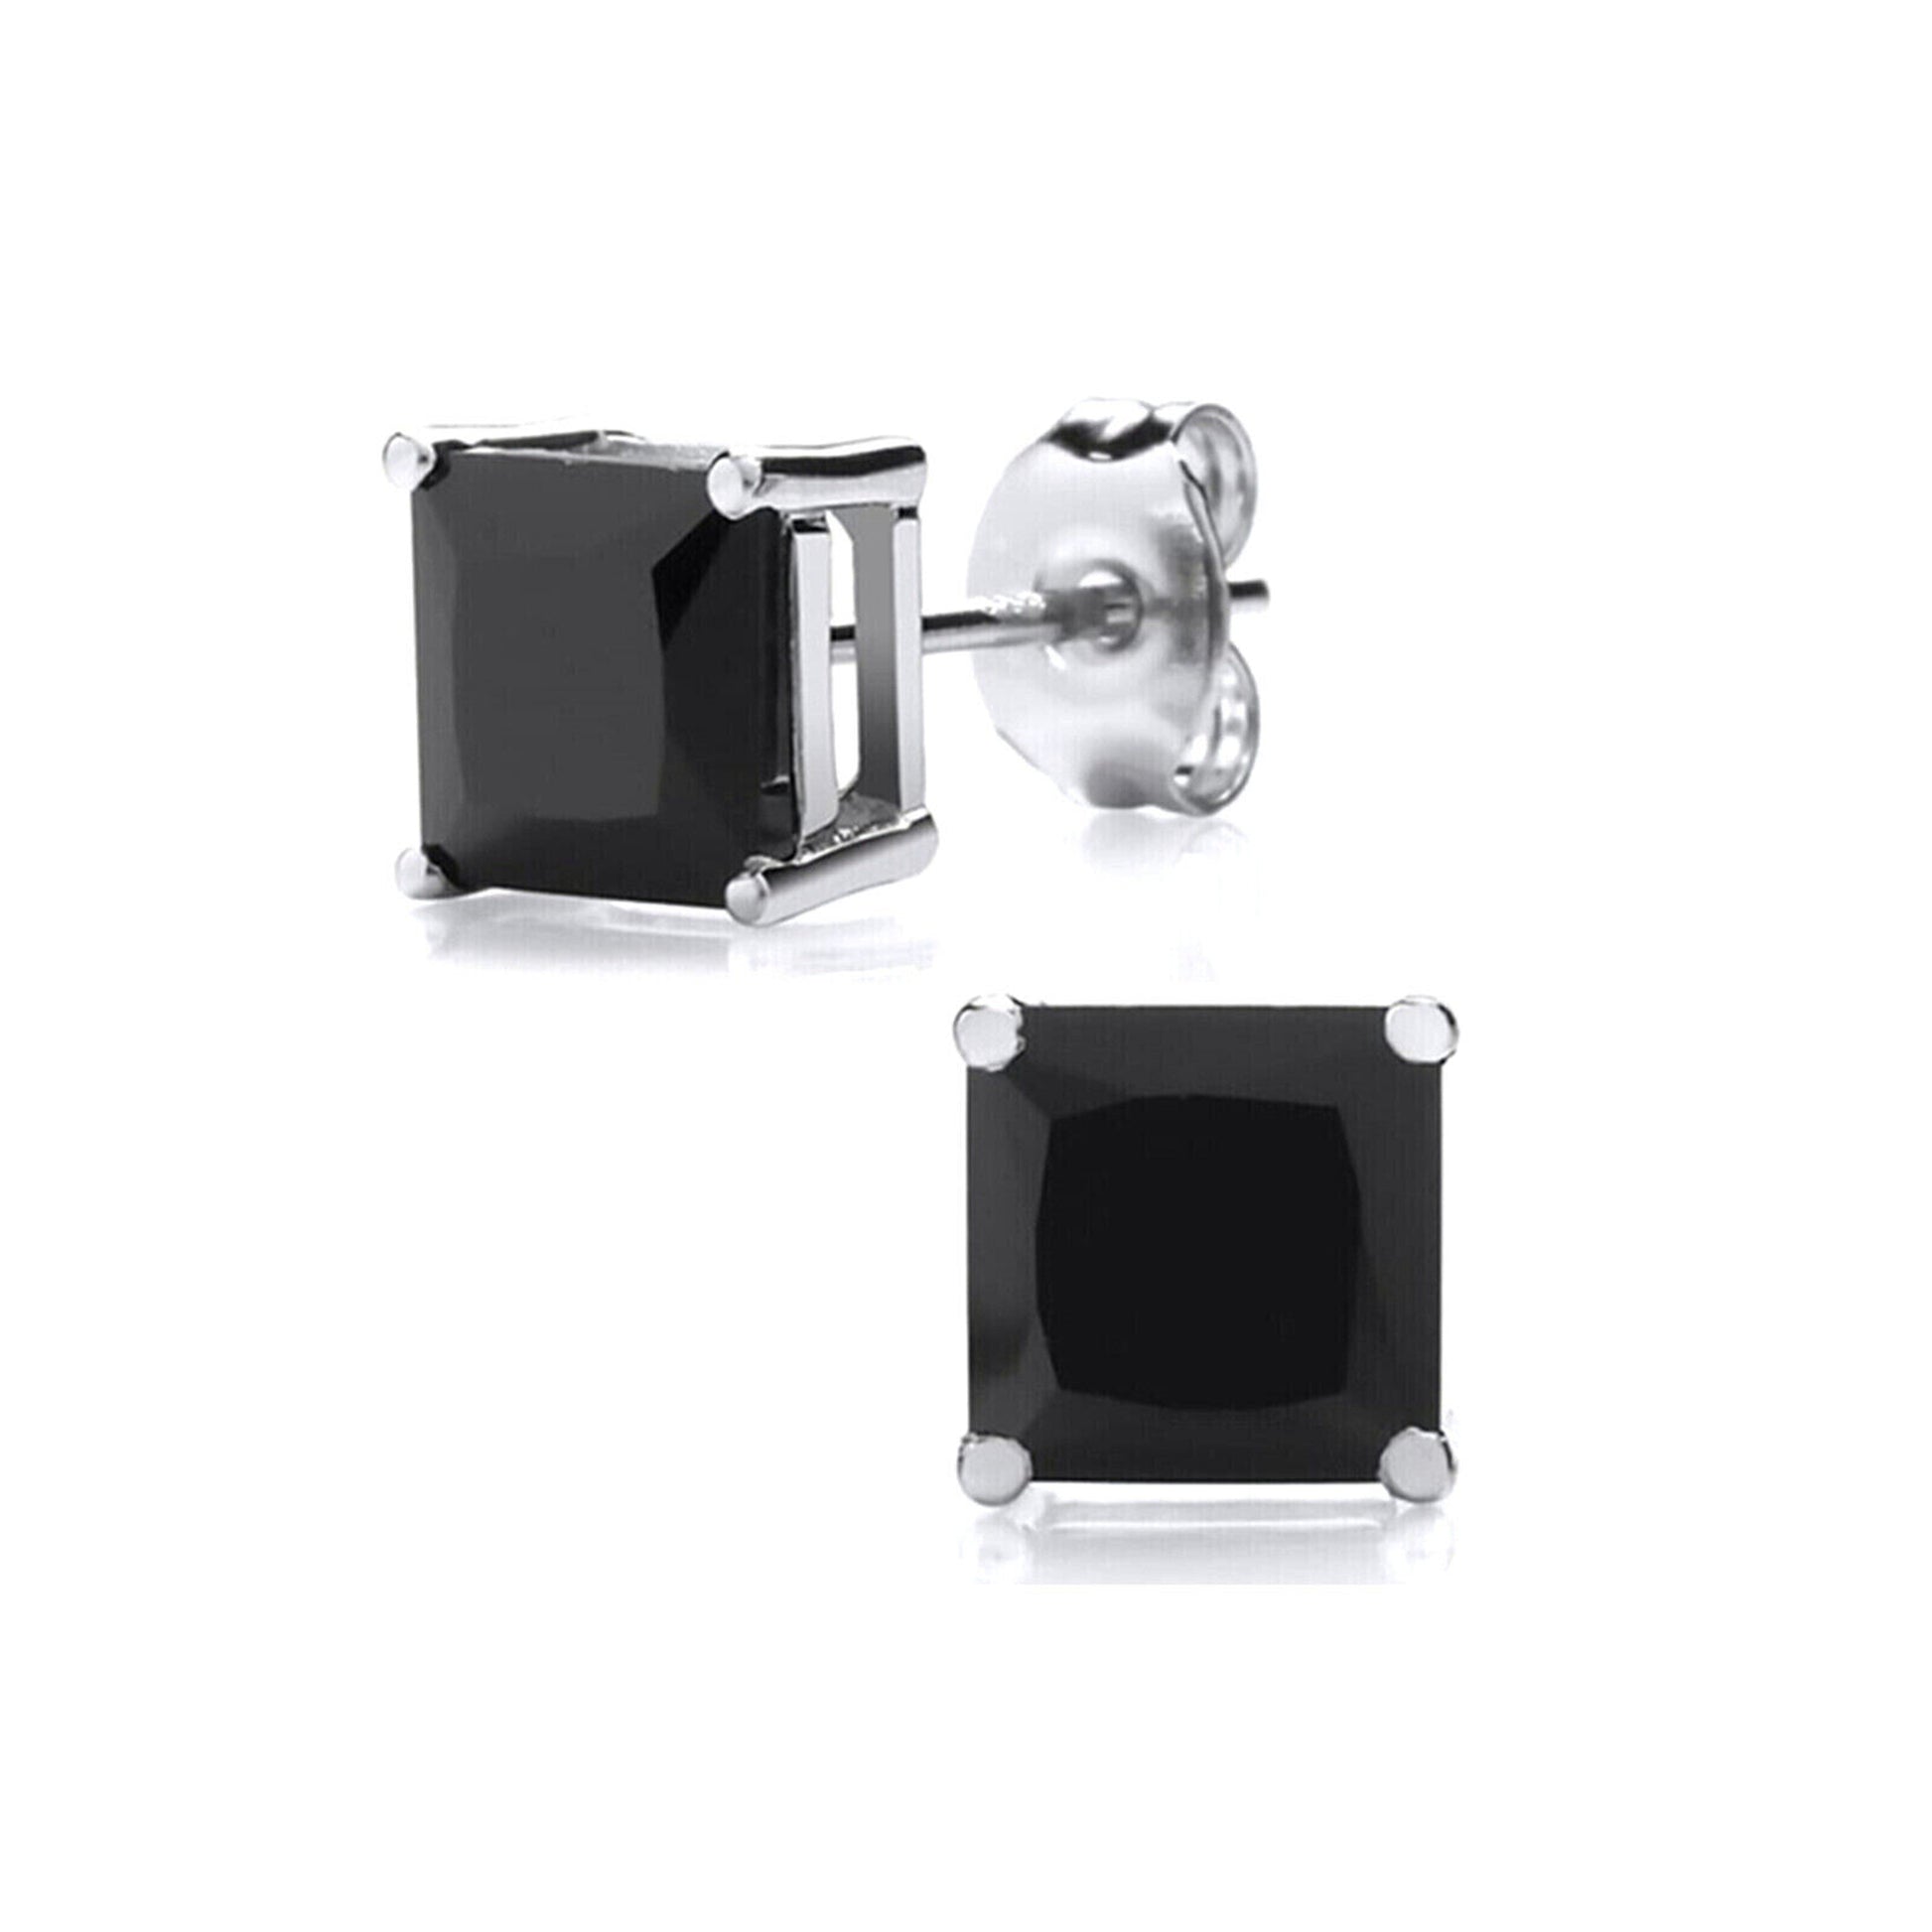 Sterling Silver Princess Cut Square CZ Unsiex Stud Earrings in Black and White, 2.5-10mm - sugarkittenlondon